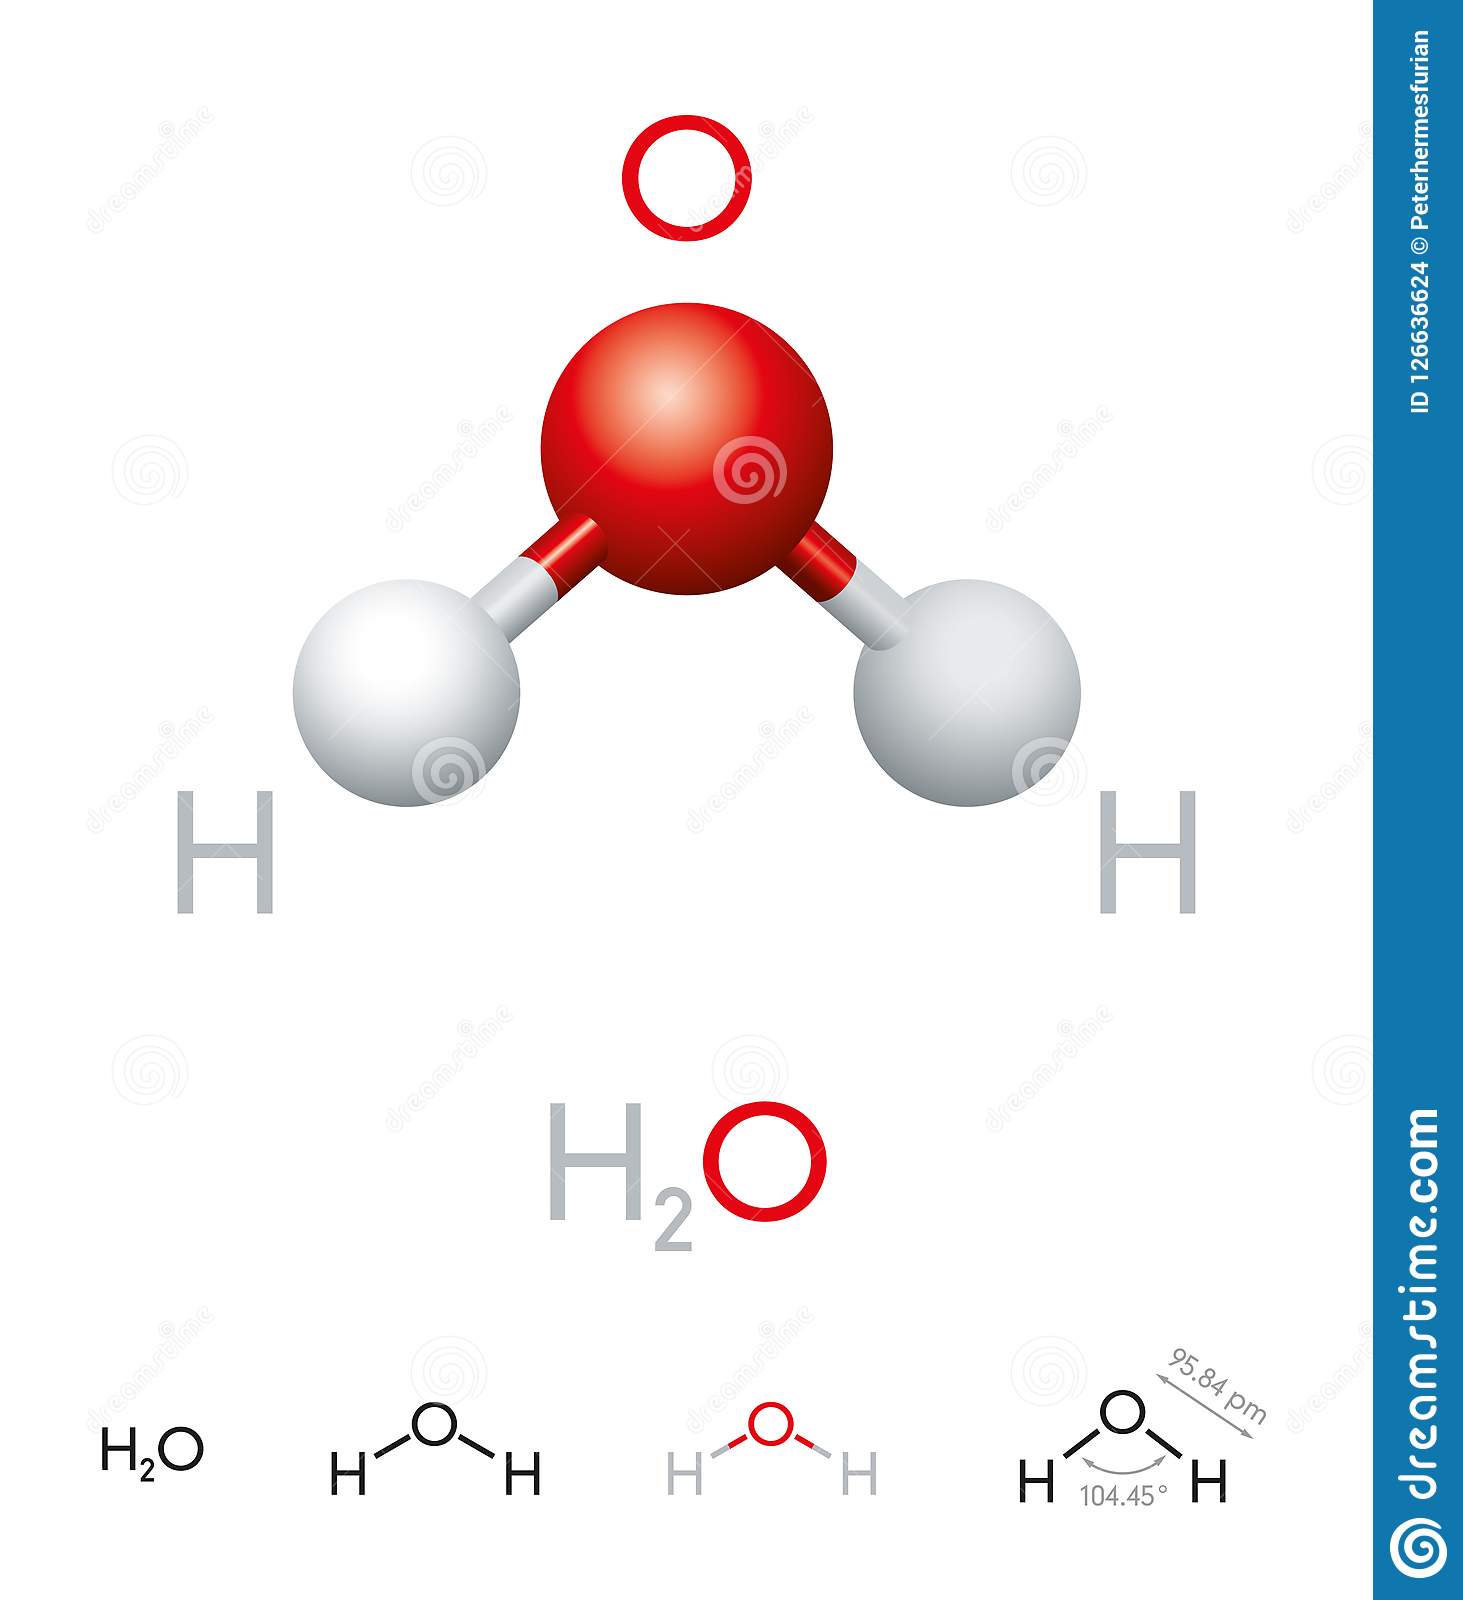 H2O Water Molecule Model And Chemical Formula Stock Vector ...